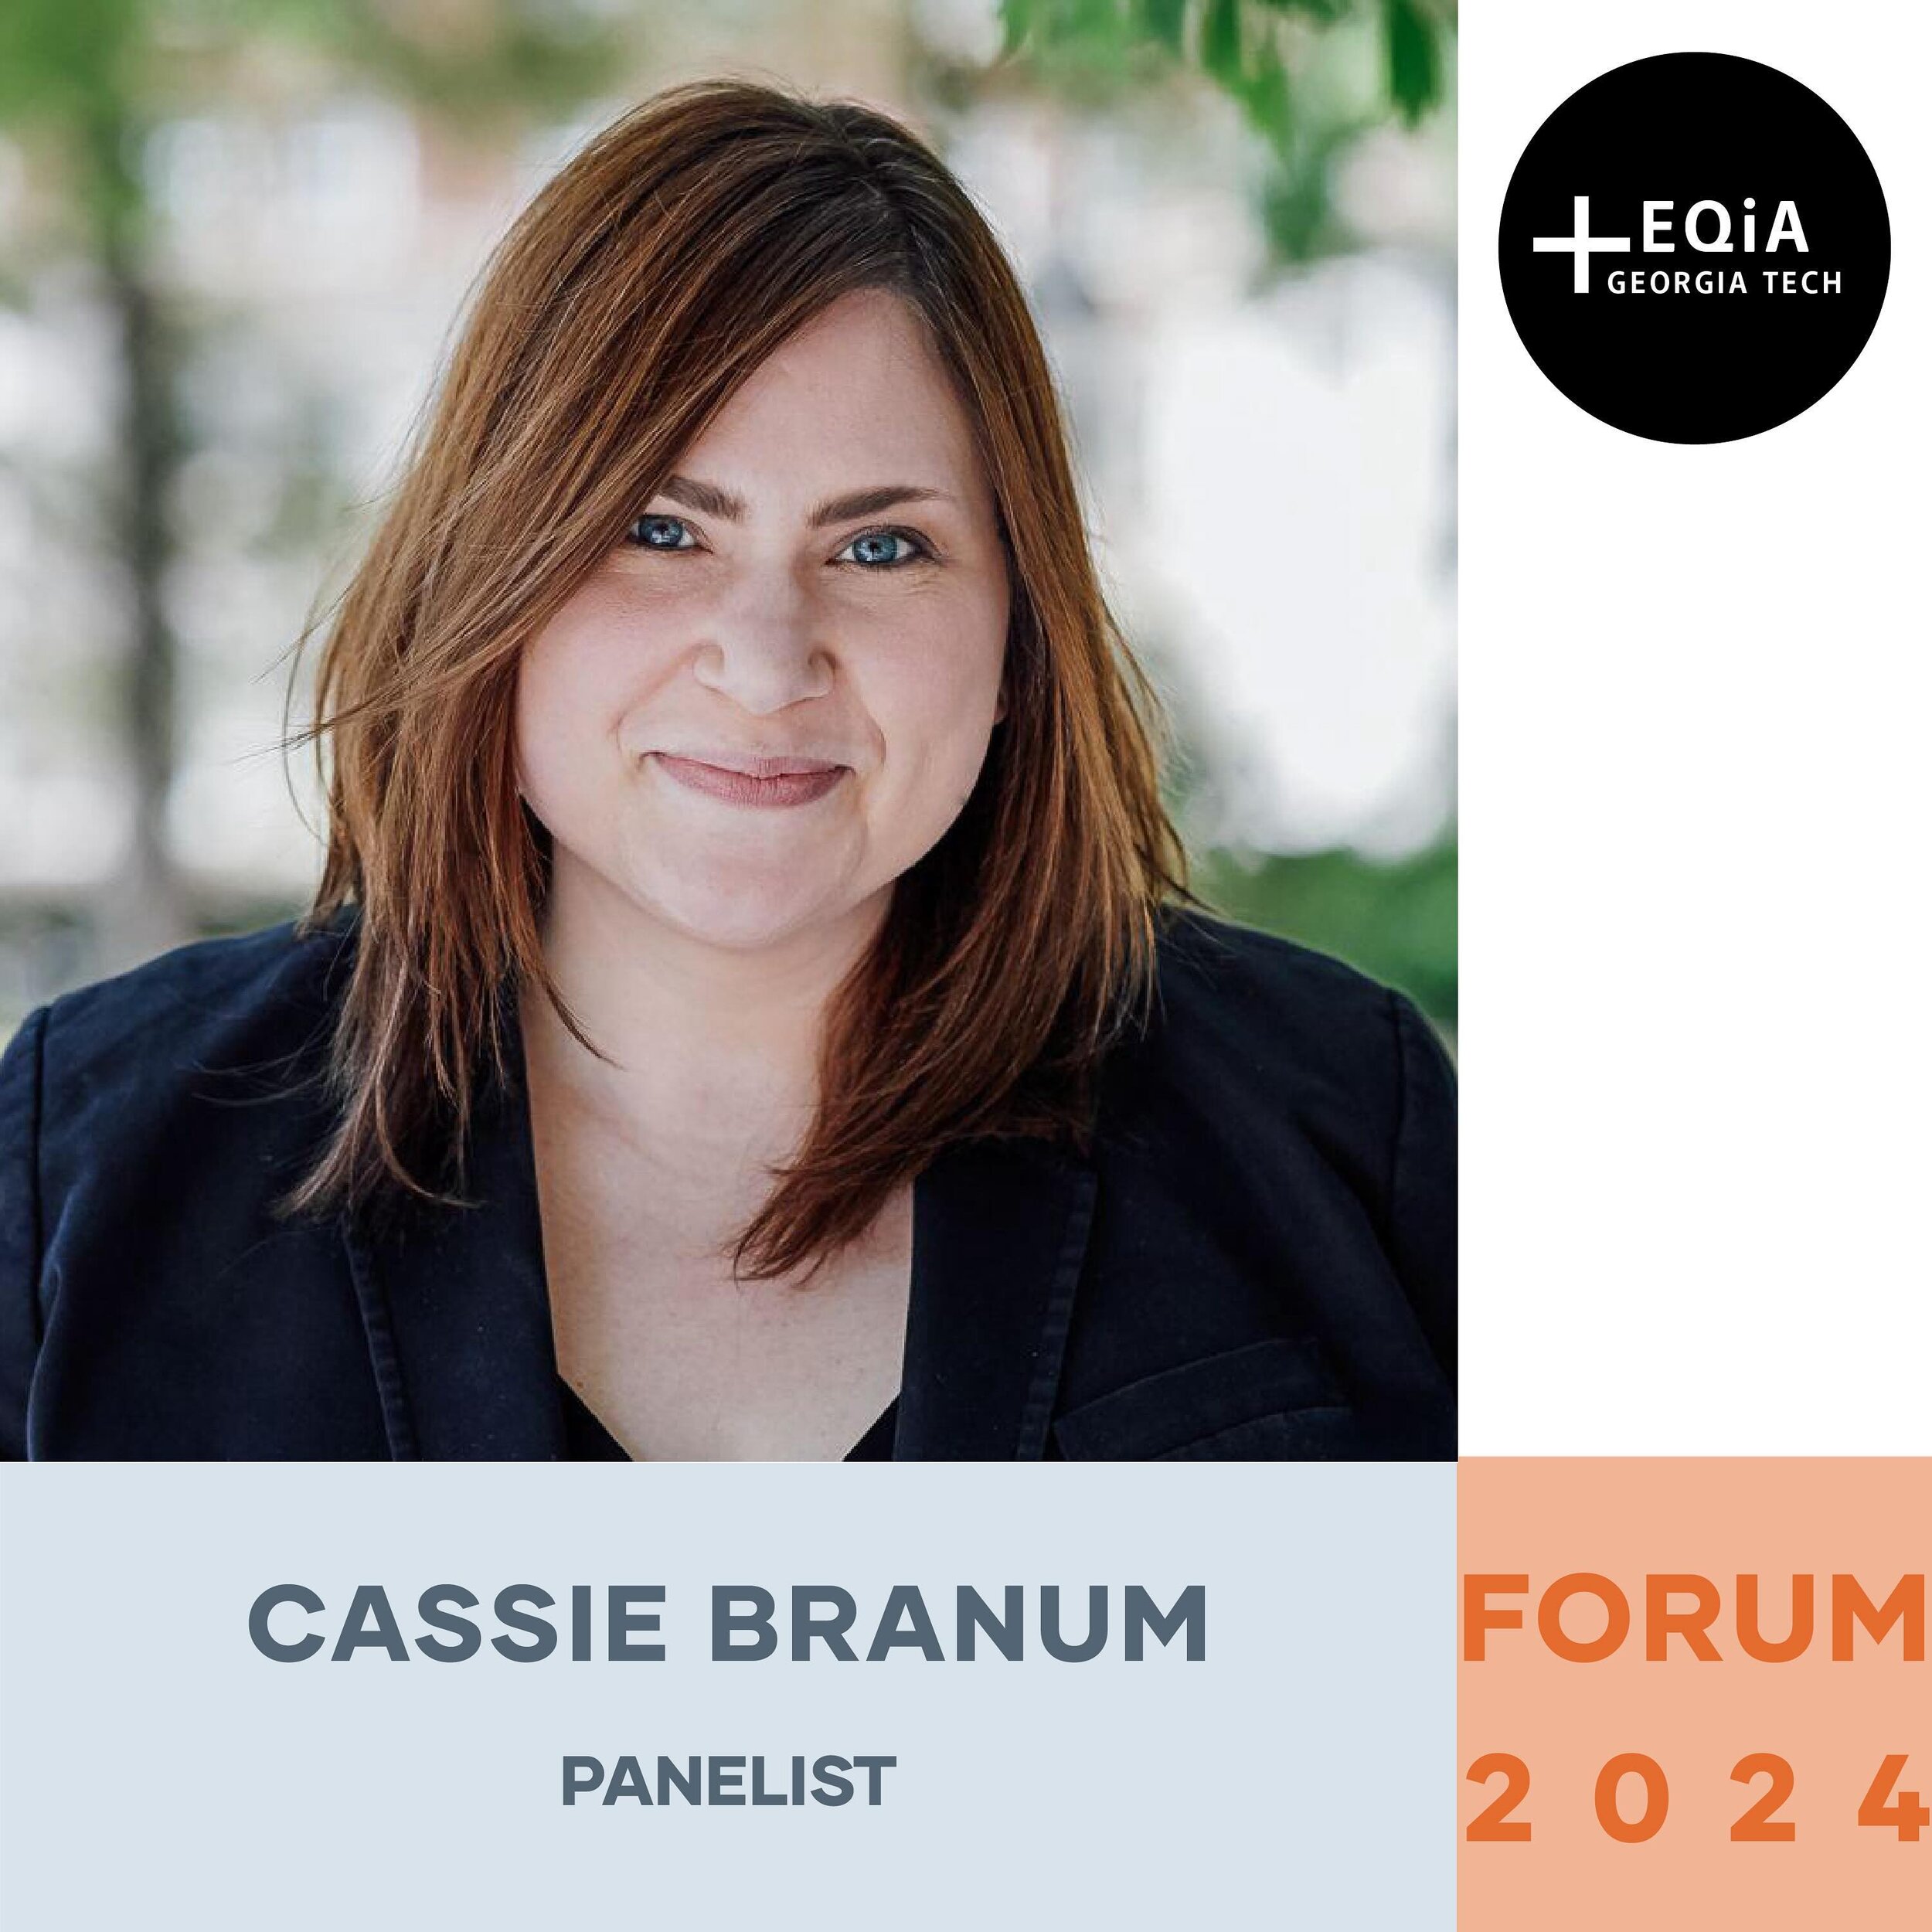 ⭐️ FORUM PANELIST ⭐️ 

Cassie designs for the human experience at the human scale, bringing together her expertise in the fields of interior design, architecture, city planning, and graphic design. She is drawn to the &ldquo;knot&rdquo; of city build